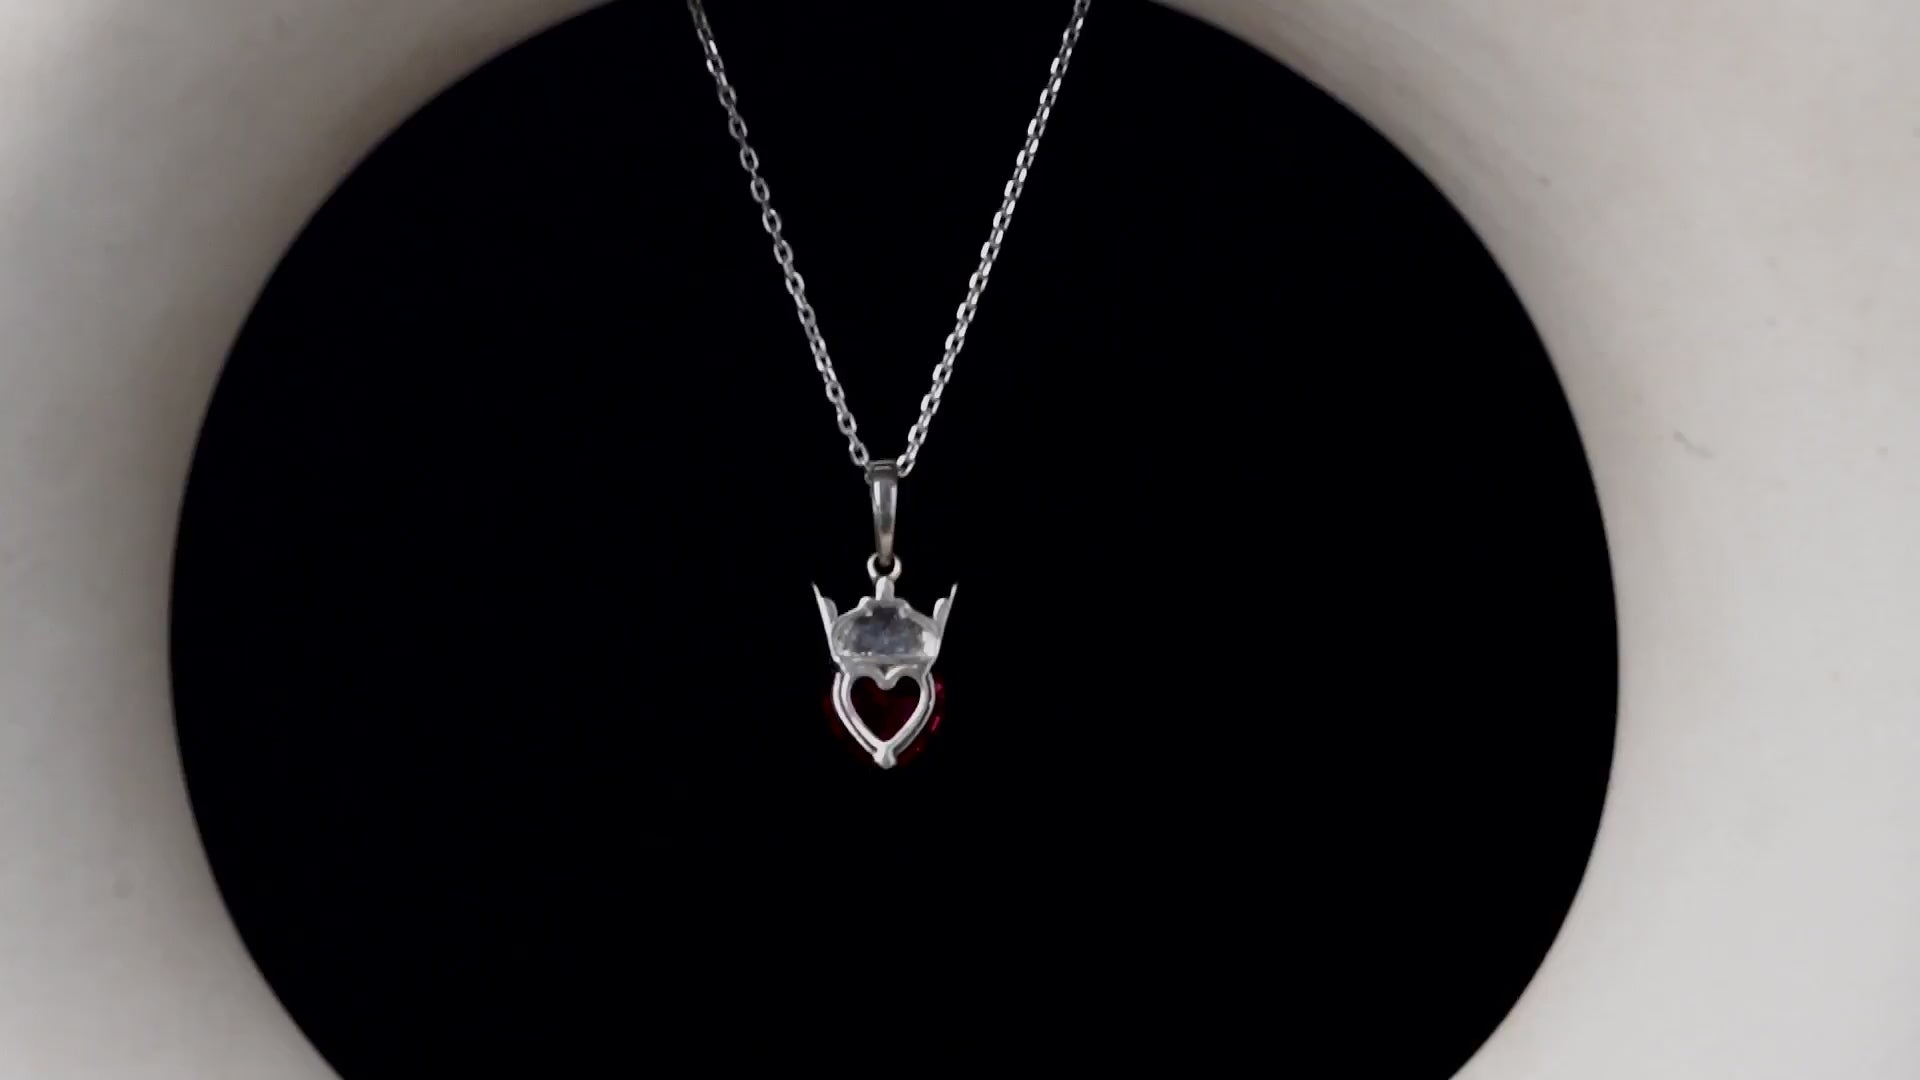 Heart Shaped Pendant On Necklace